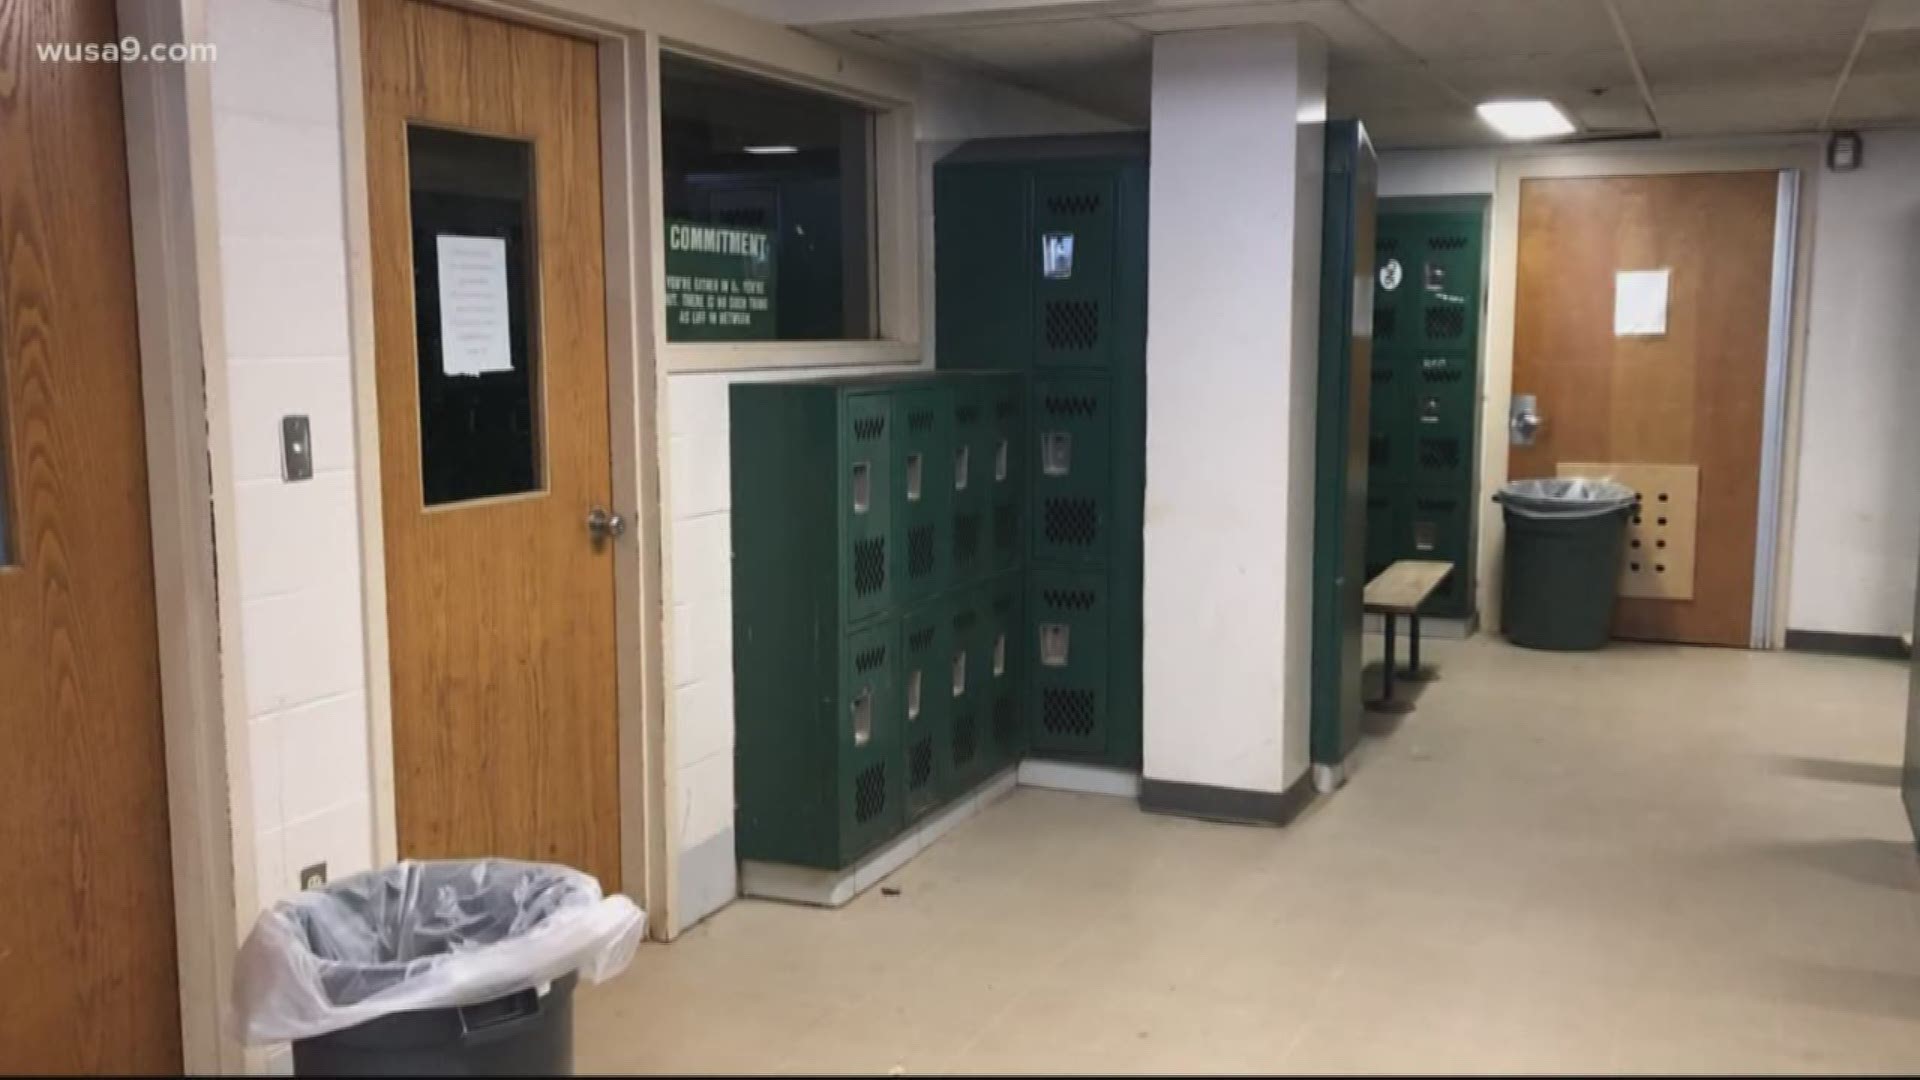 Four freshman football players say sophomores used brooms to sexually assault them back in 2018.
Today, lawyers for the alleged victims filed lawsuits.